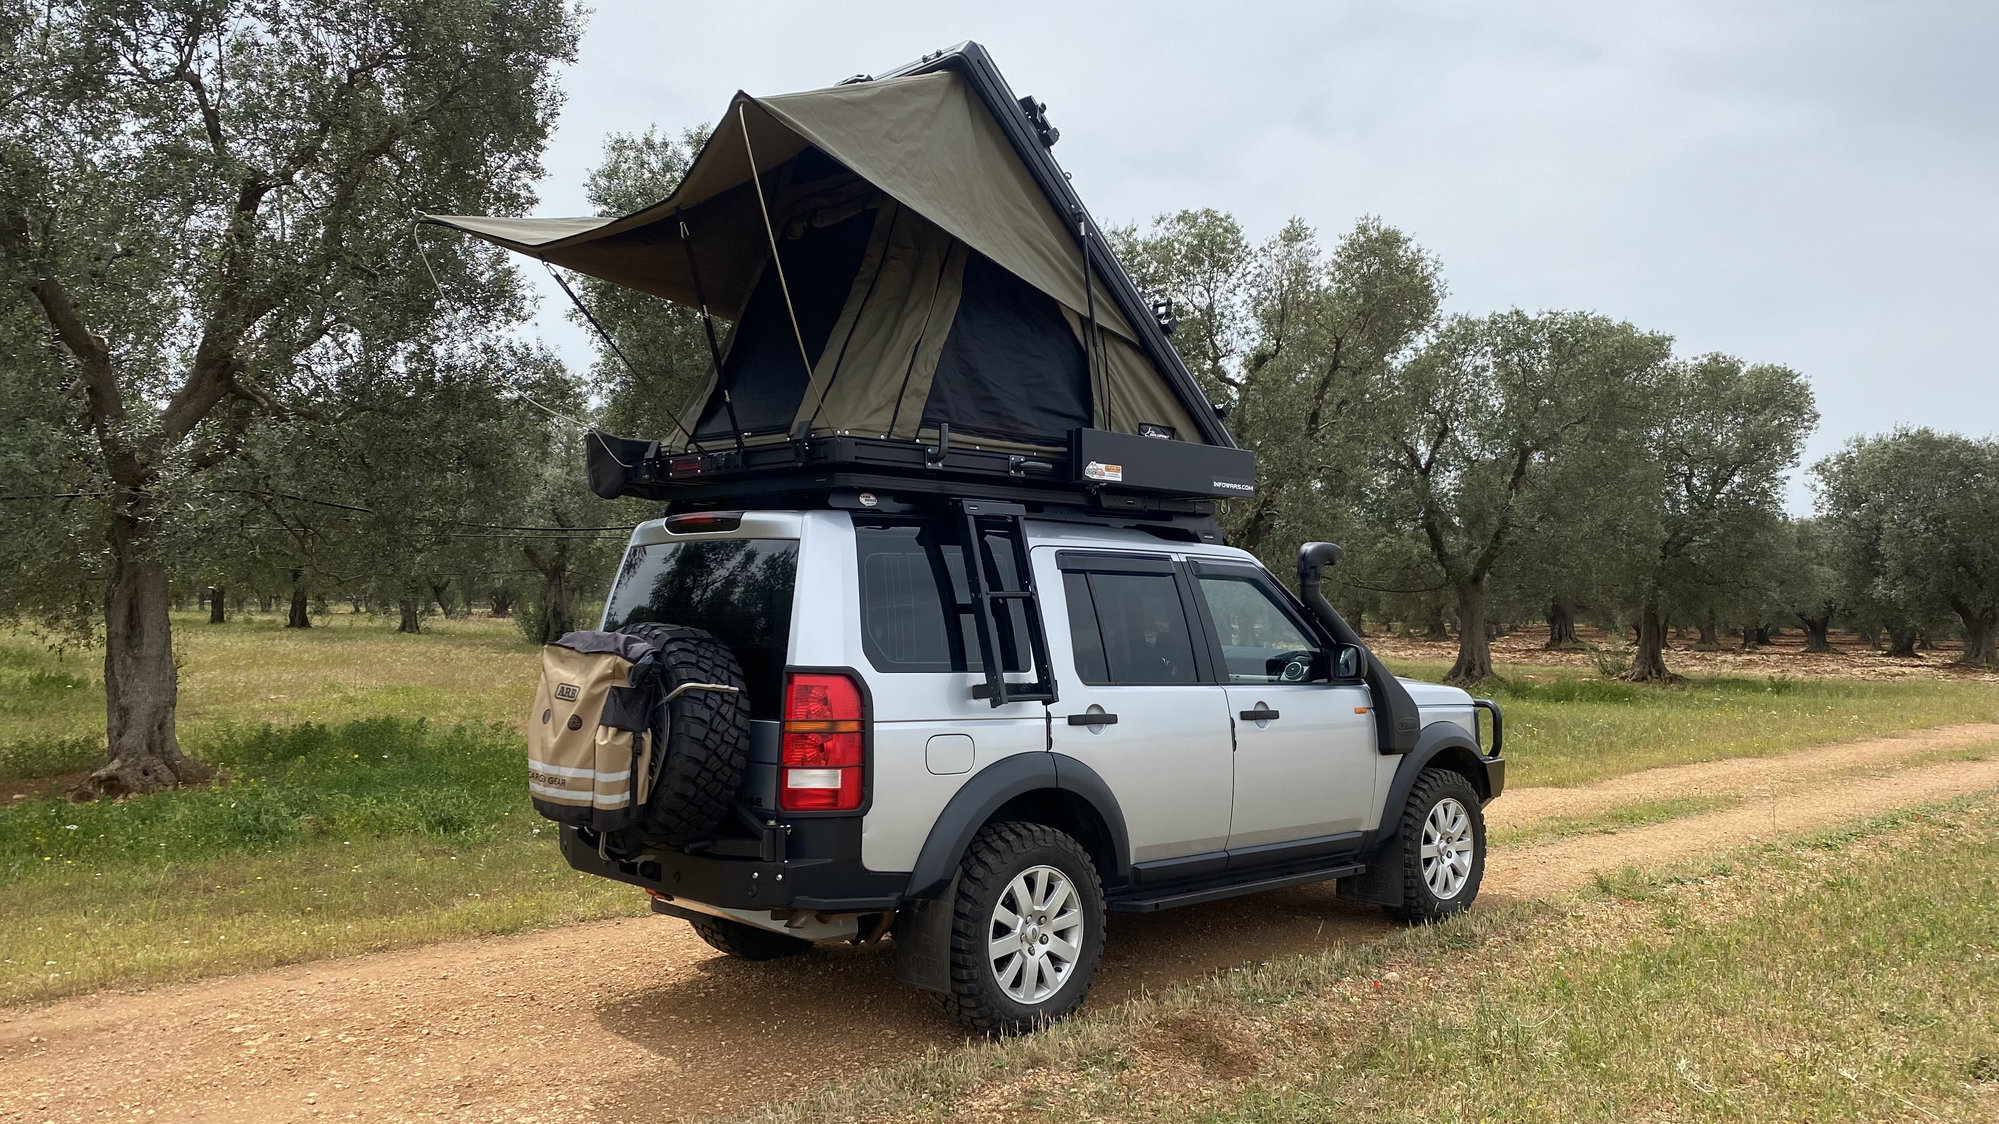 Overland Classifieds :: 2006 Land Rover Discovery LR3 - Expedition Portal